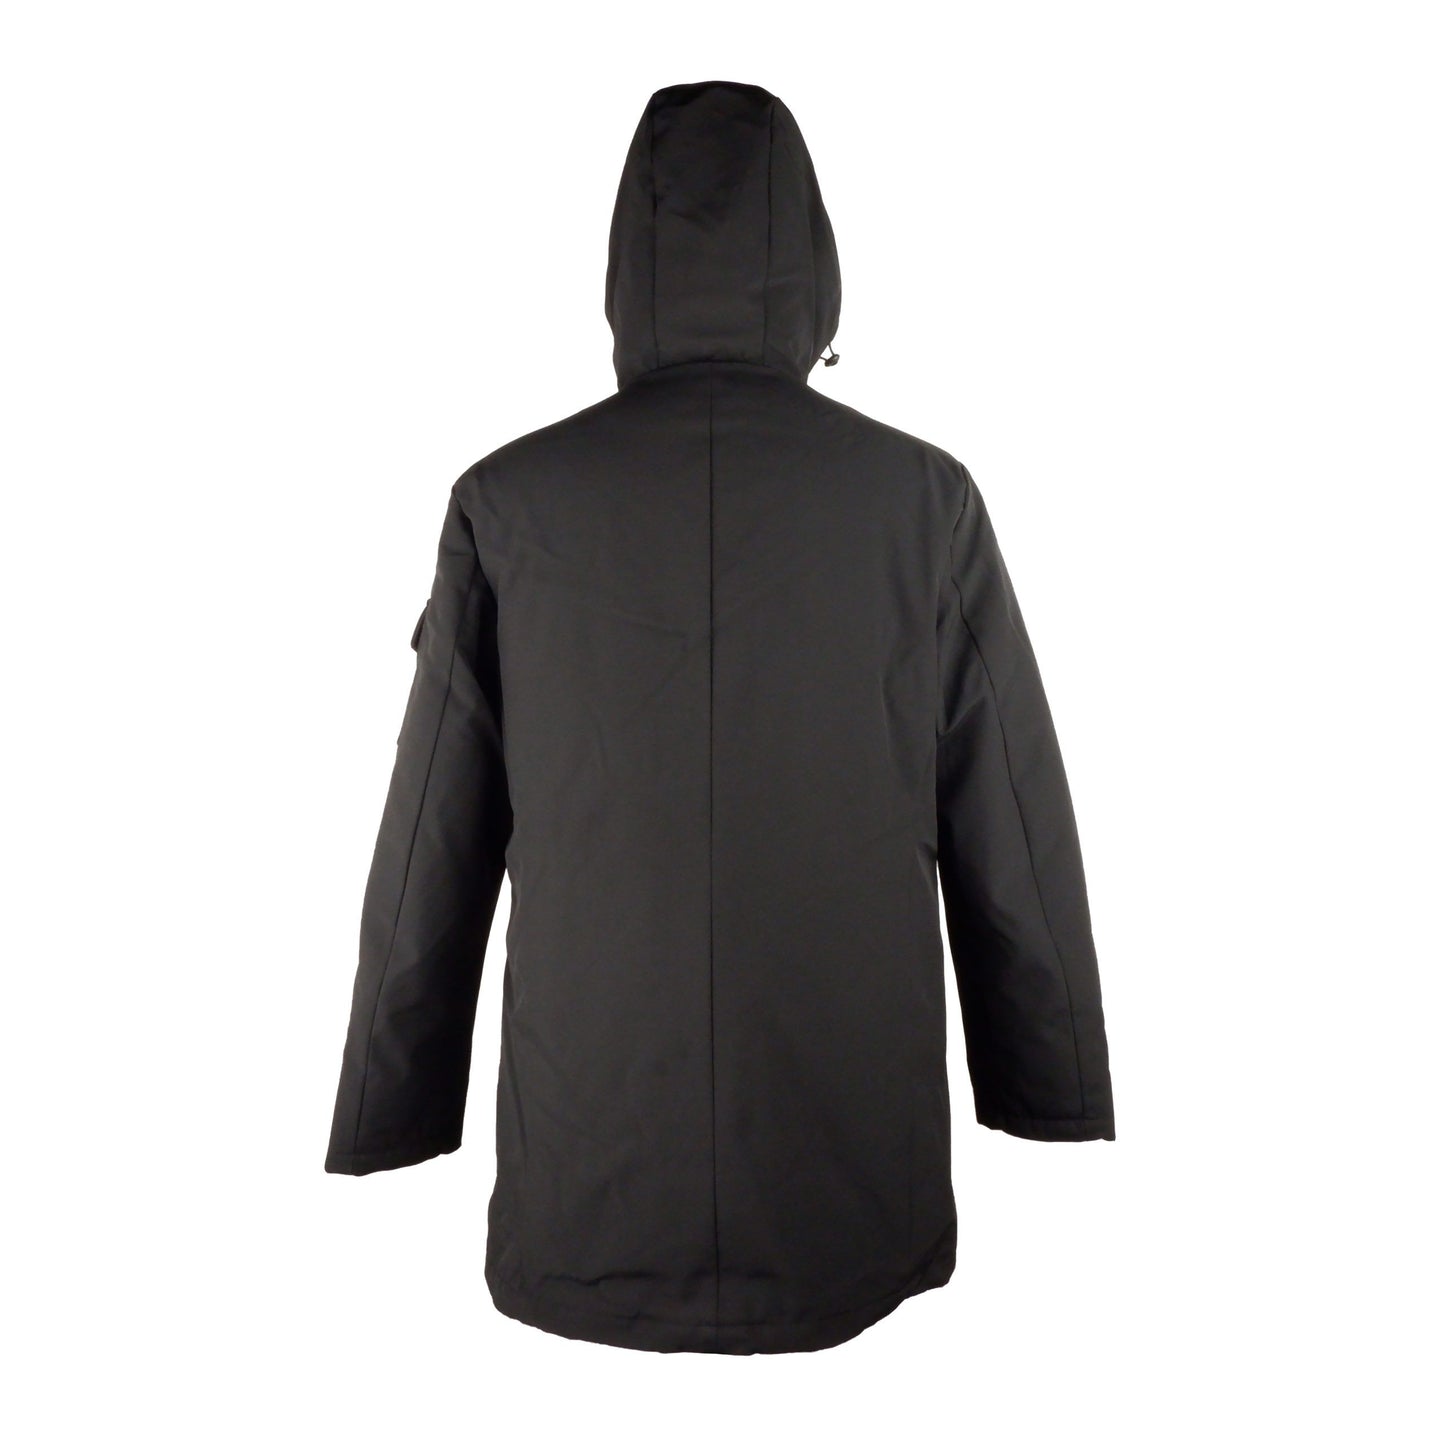 Sleek Hooded Long Jacket with Zip and Button Closure